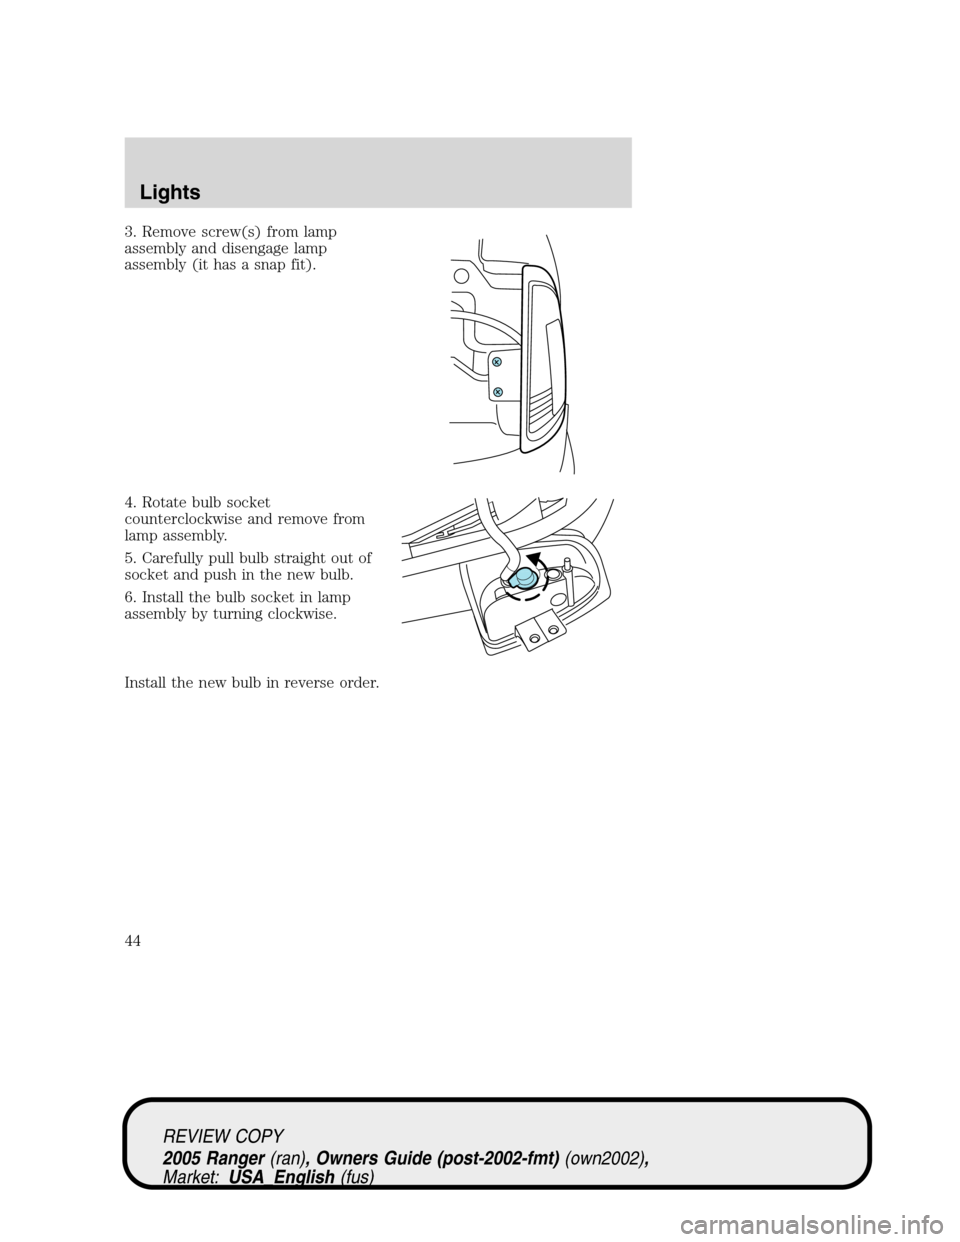 FORD RANGER 2005 2.G Service Manual 3. Remove screw(s) from lamp
assembly and disengage lamp
assembly (it has a snap fit).
4. Rotate bulb socket
counterclockwise and remove from
lamp assembly.
5. Carefully pull bulb straight out of
sock